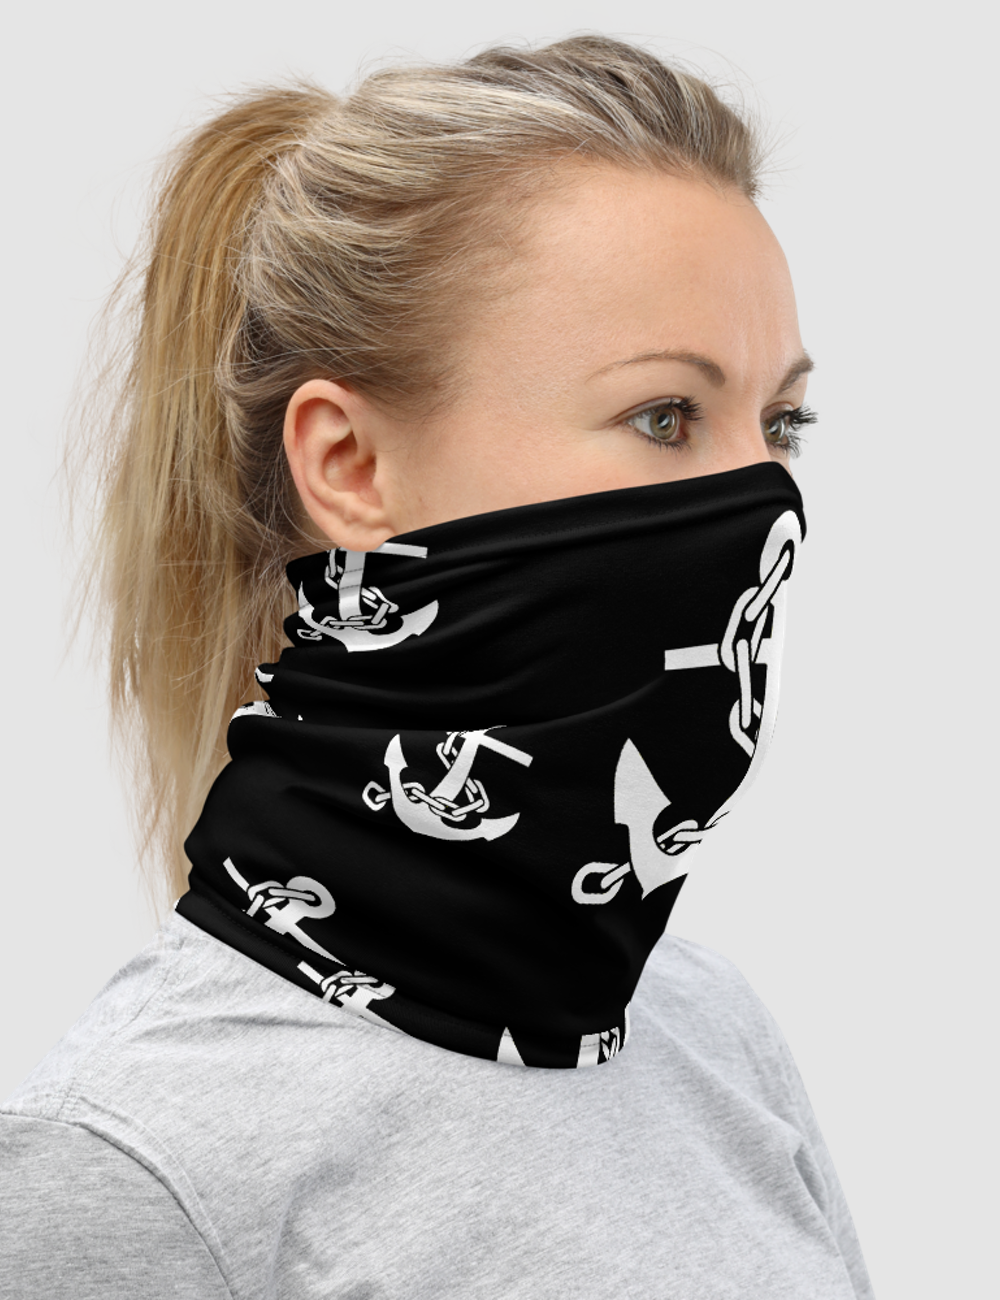 Chained Sea Anchors | Neck Gaiter Face Mask OniTakai